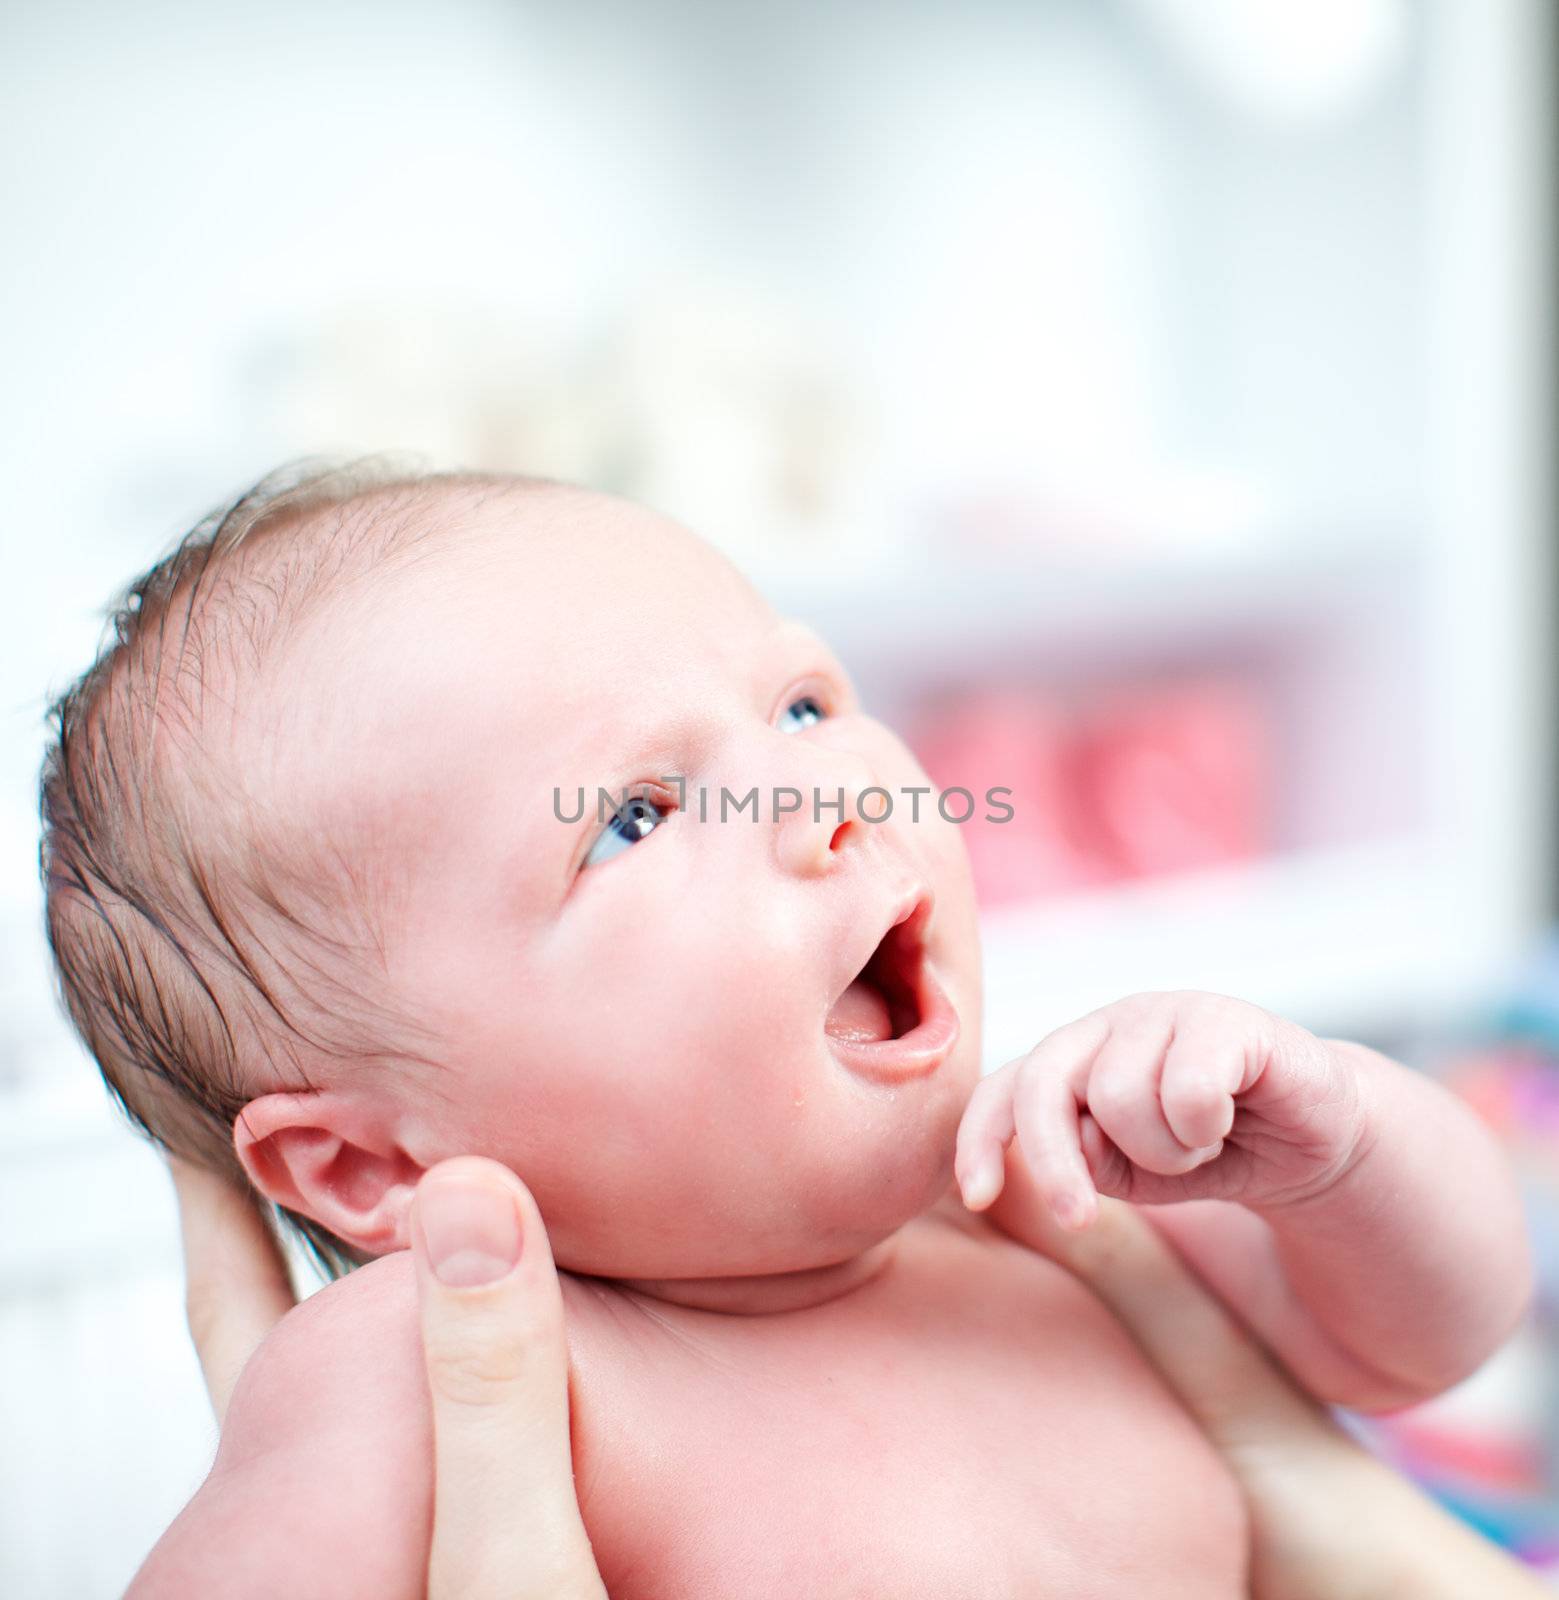 Newborn baby with look of wonderment by langstrup